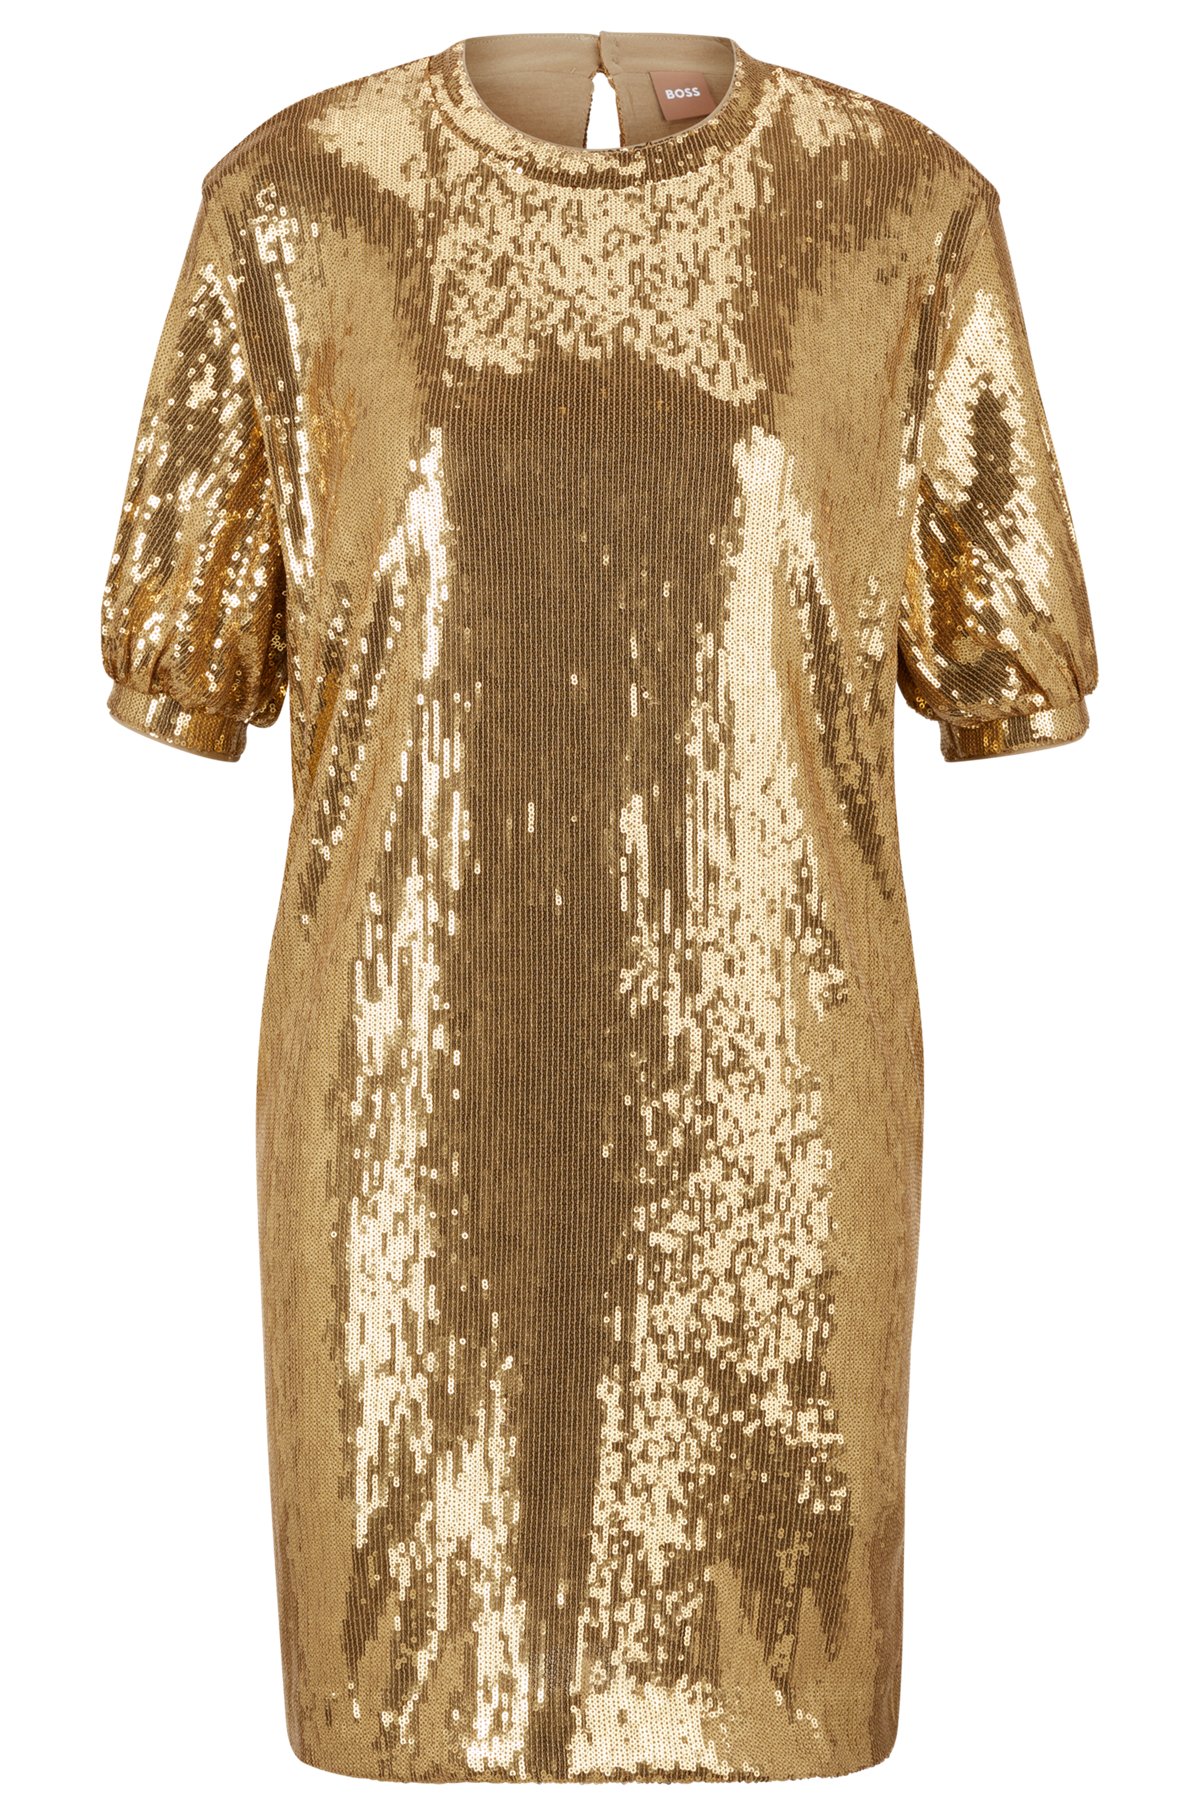 BOSS - Relaxed-fit sequin dress in stretch jersey